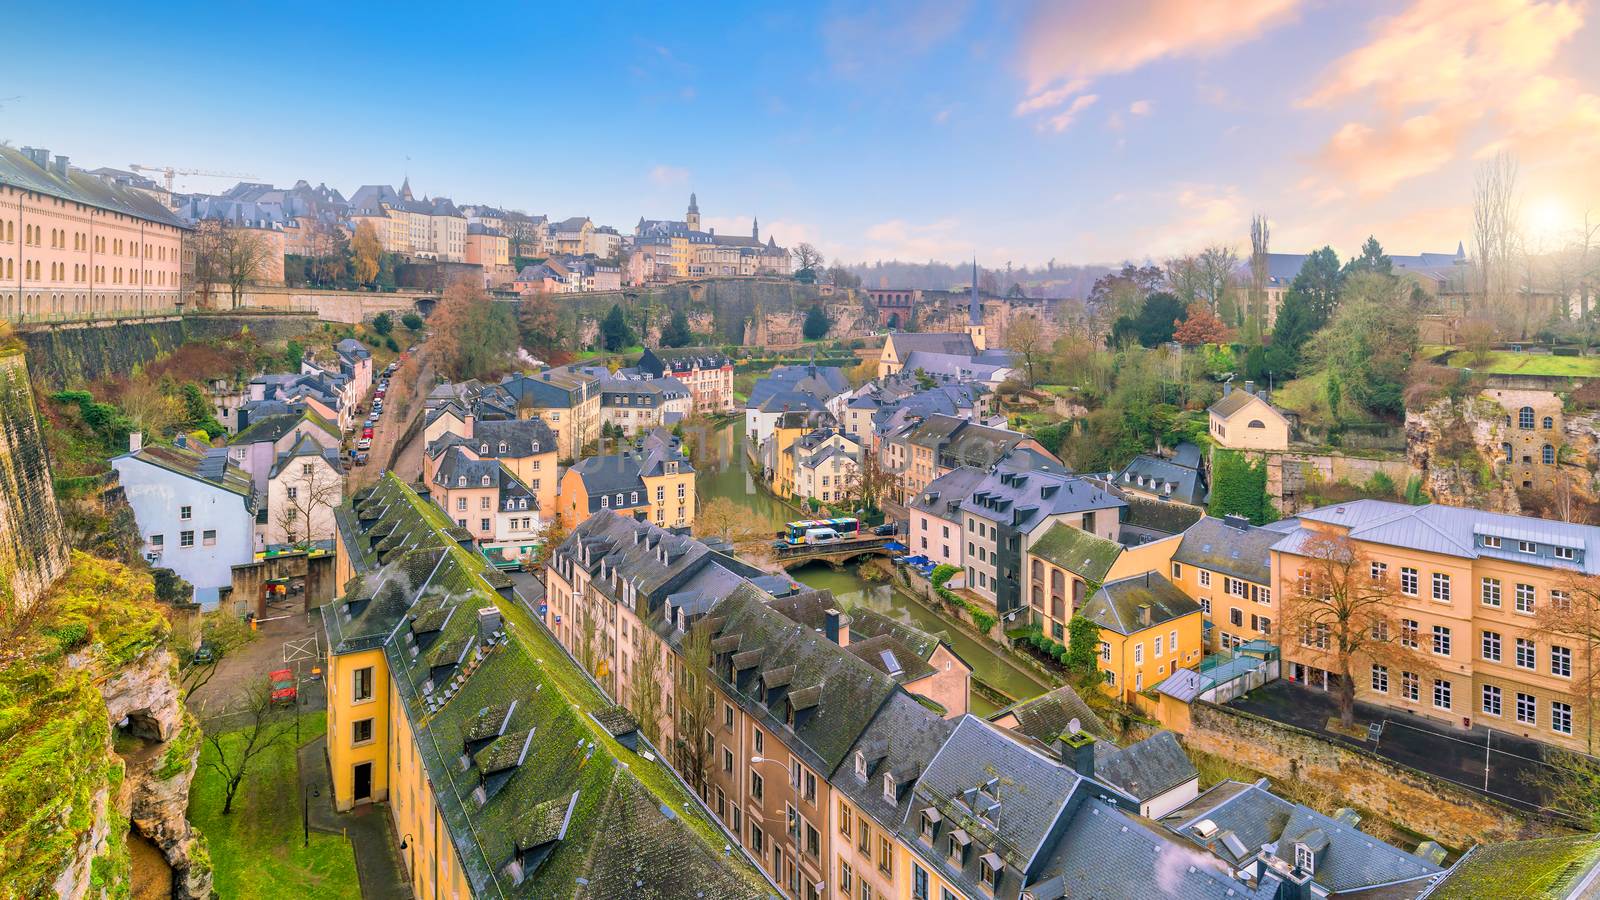 Skyline of old town Luxembourg City from top view by f11photo